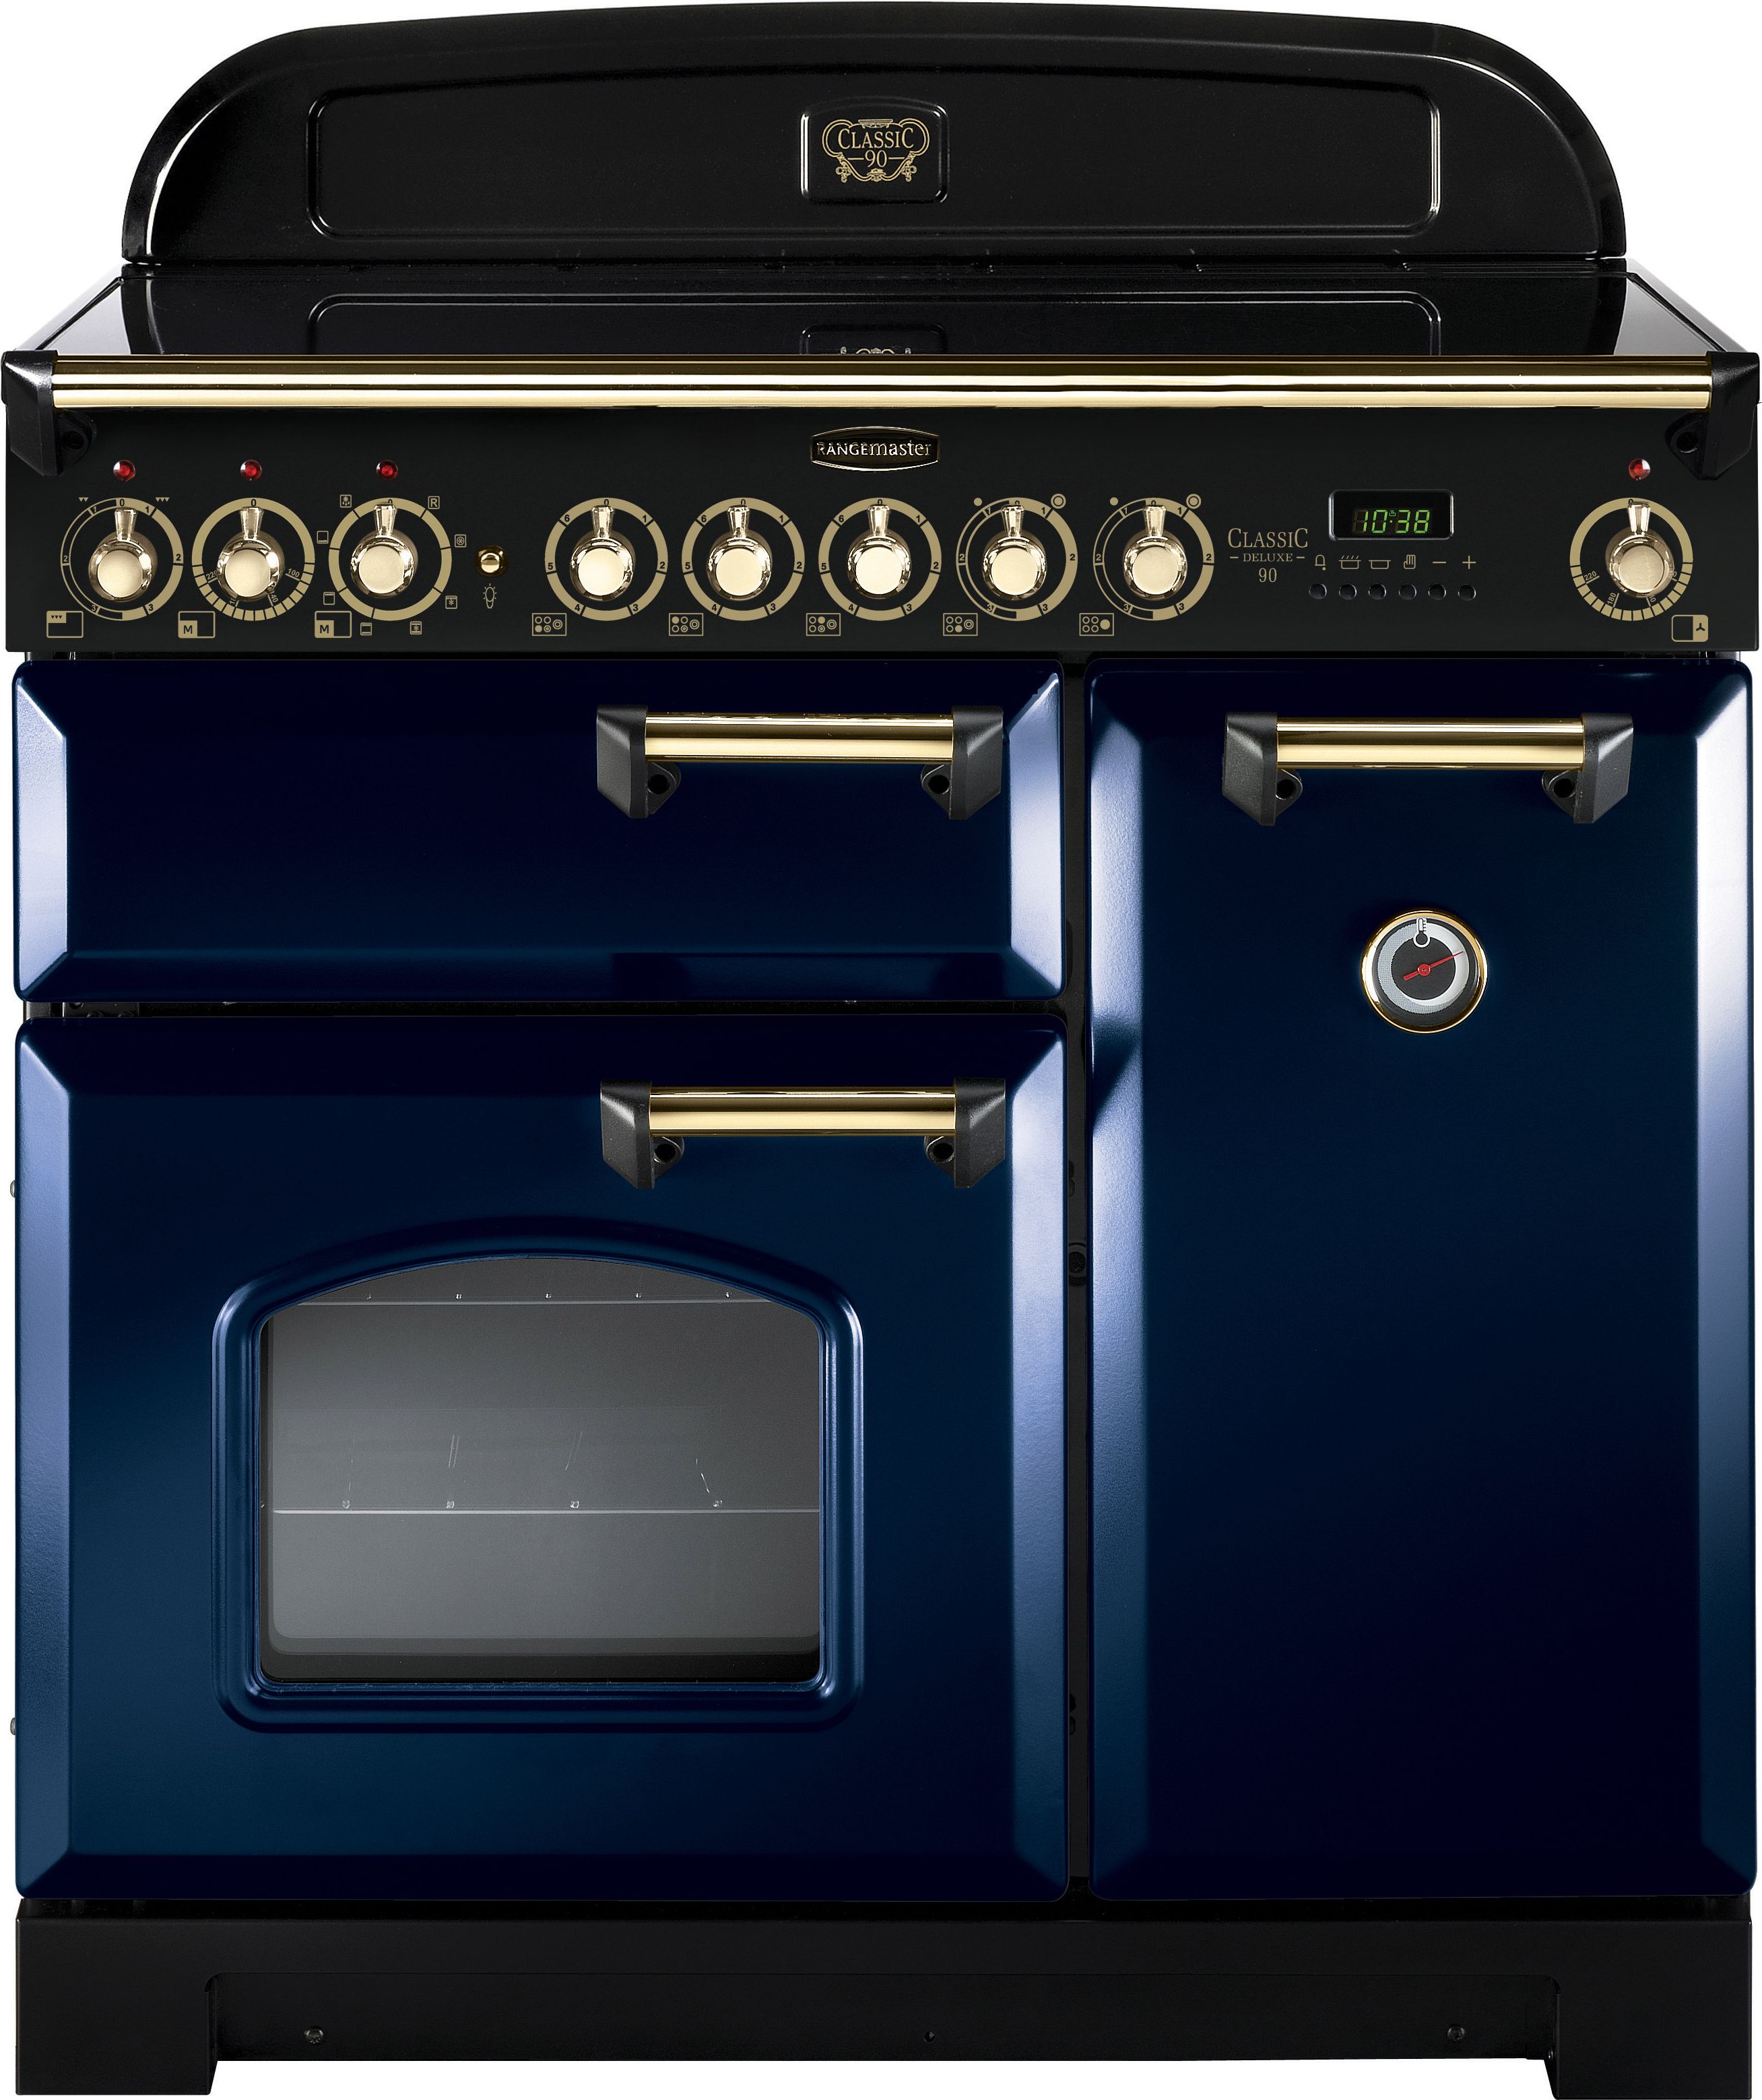 Rangemaster Classic Deluxe CDL90ECRB/B 90cm Electric Range Cooker with Ceramic Hob - Regal Blue / Brass - A/A Rated, Blue